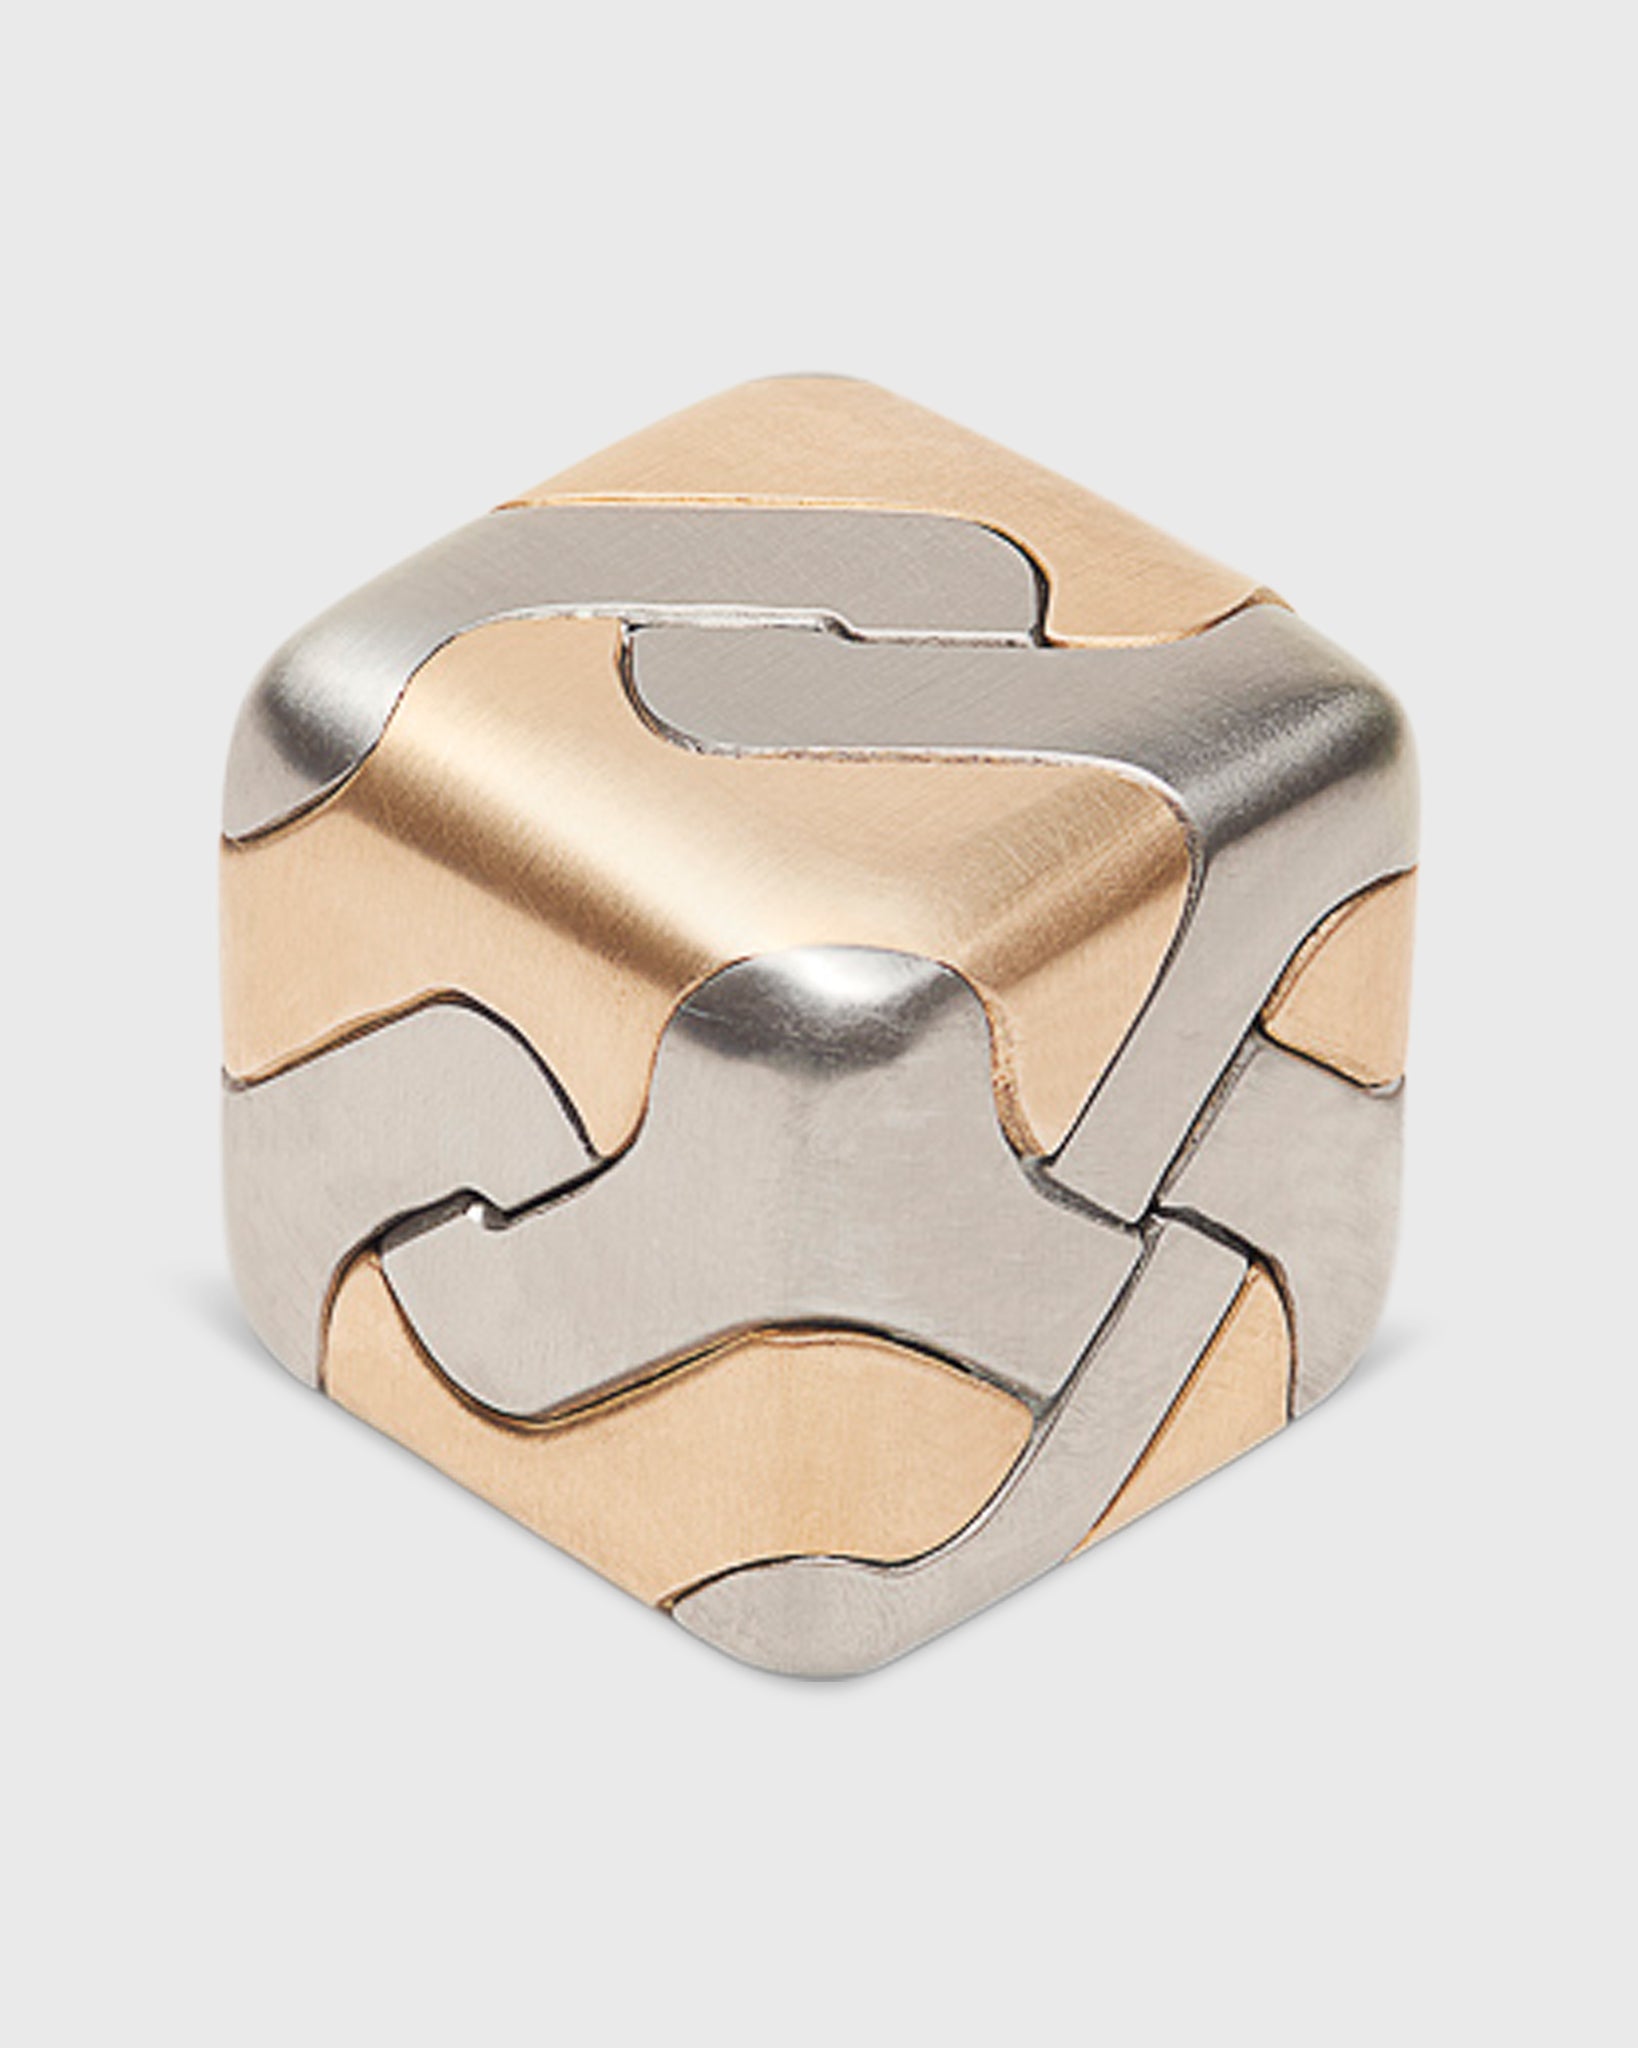 Tycho Puzzle in Brass/Steel